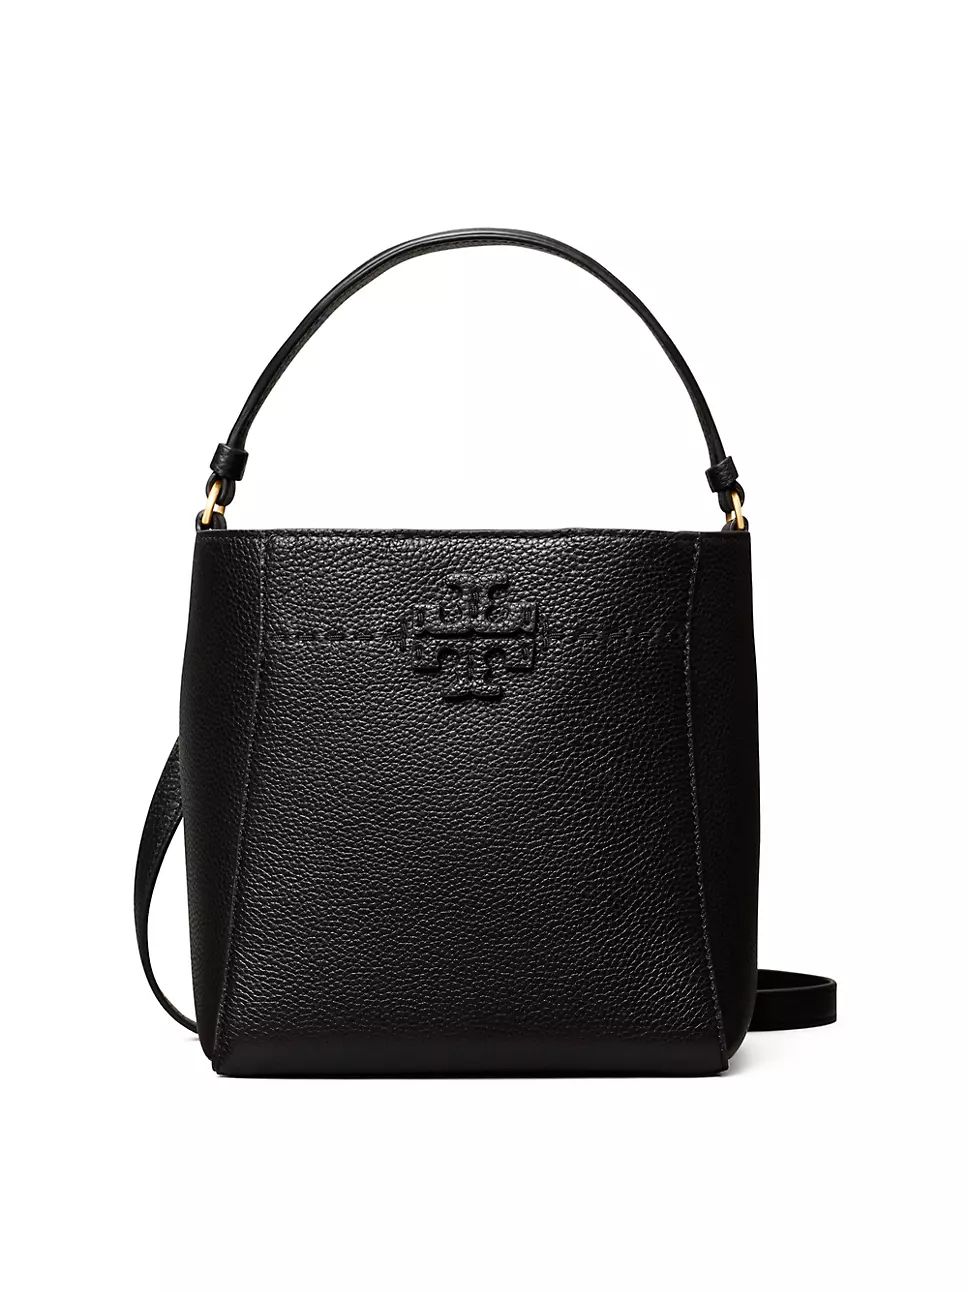 Tory Burch Small McGraw Leather Bucket Bag | Saks Fifth Avenue